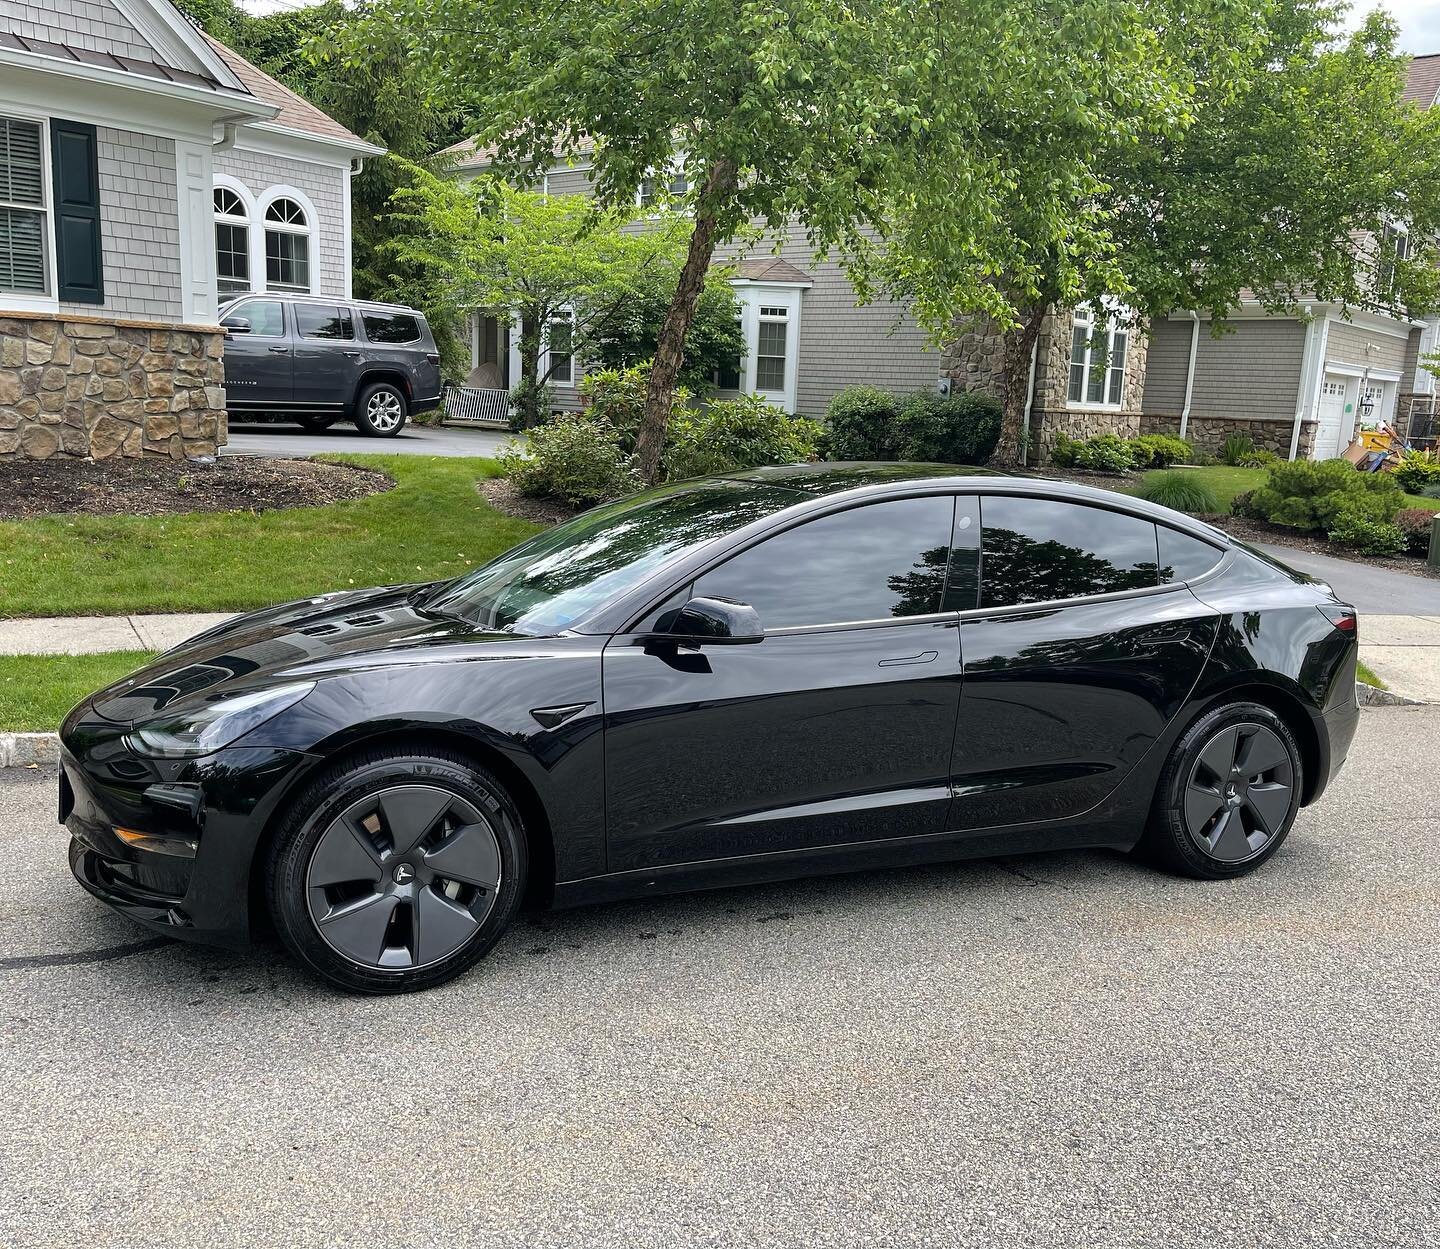 Tesla&rsquo;s LOVE the Presidential treatment!
______________________________
Presidential Detailing Services LLC.
Servicing the New Jersey area. 
Schedule an appointment for that
Presidential treatment.
______________________________
PREMIUM ON-SITE